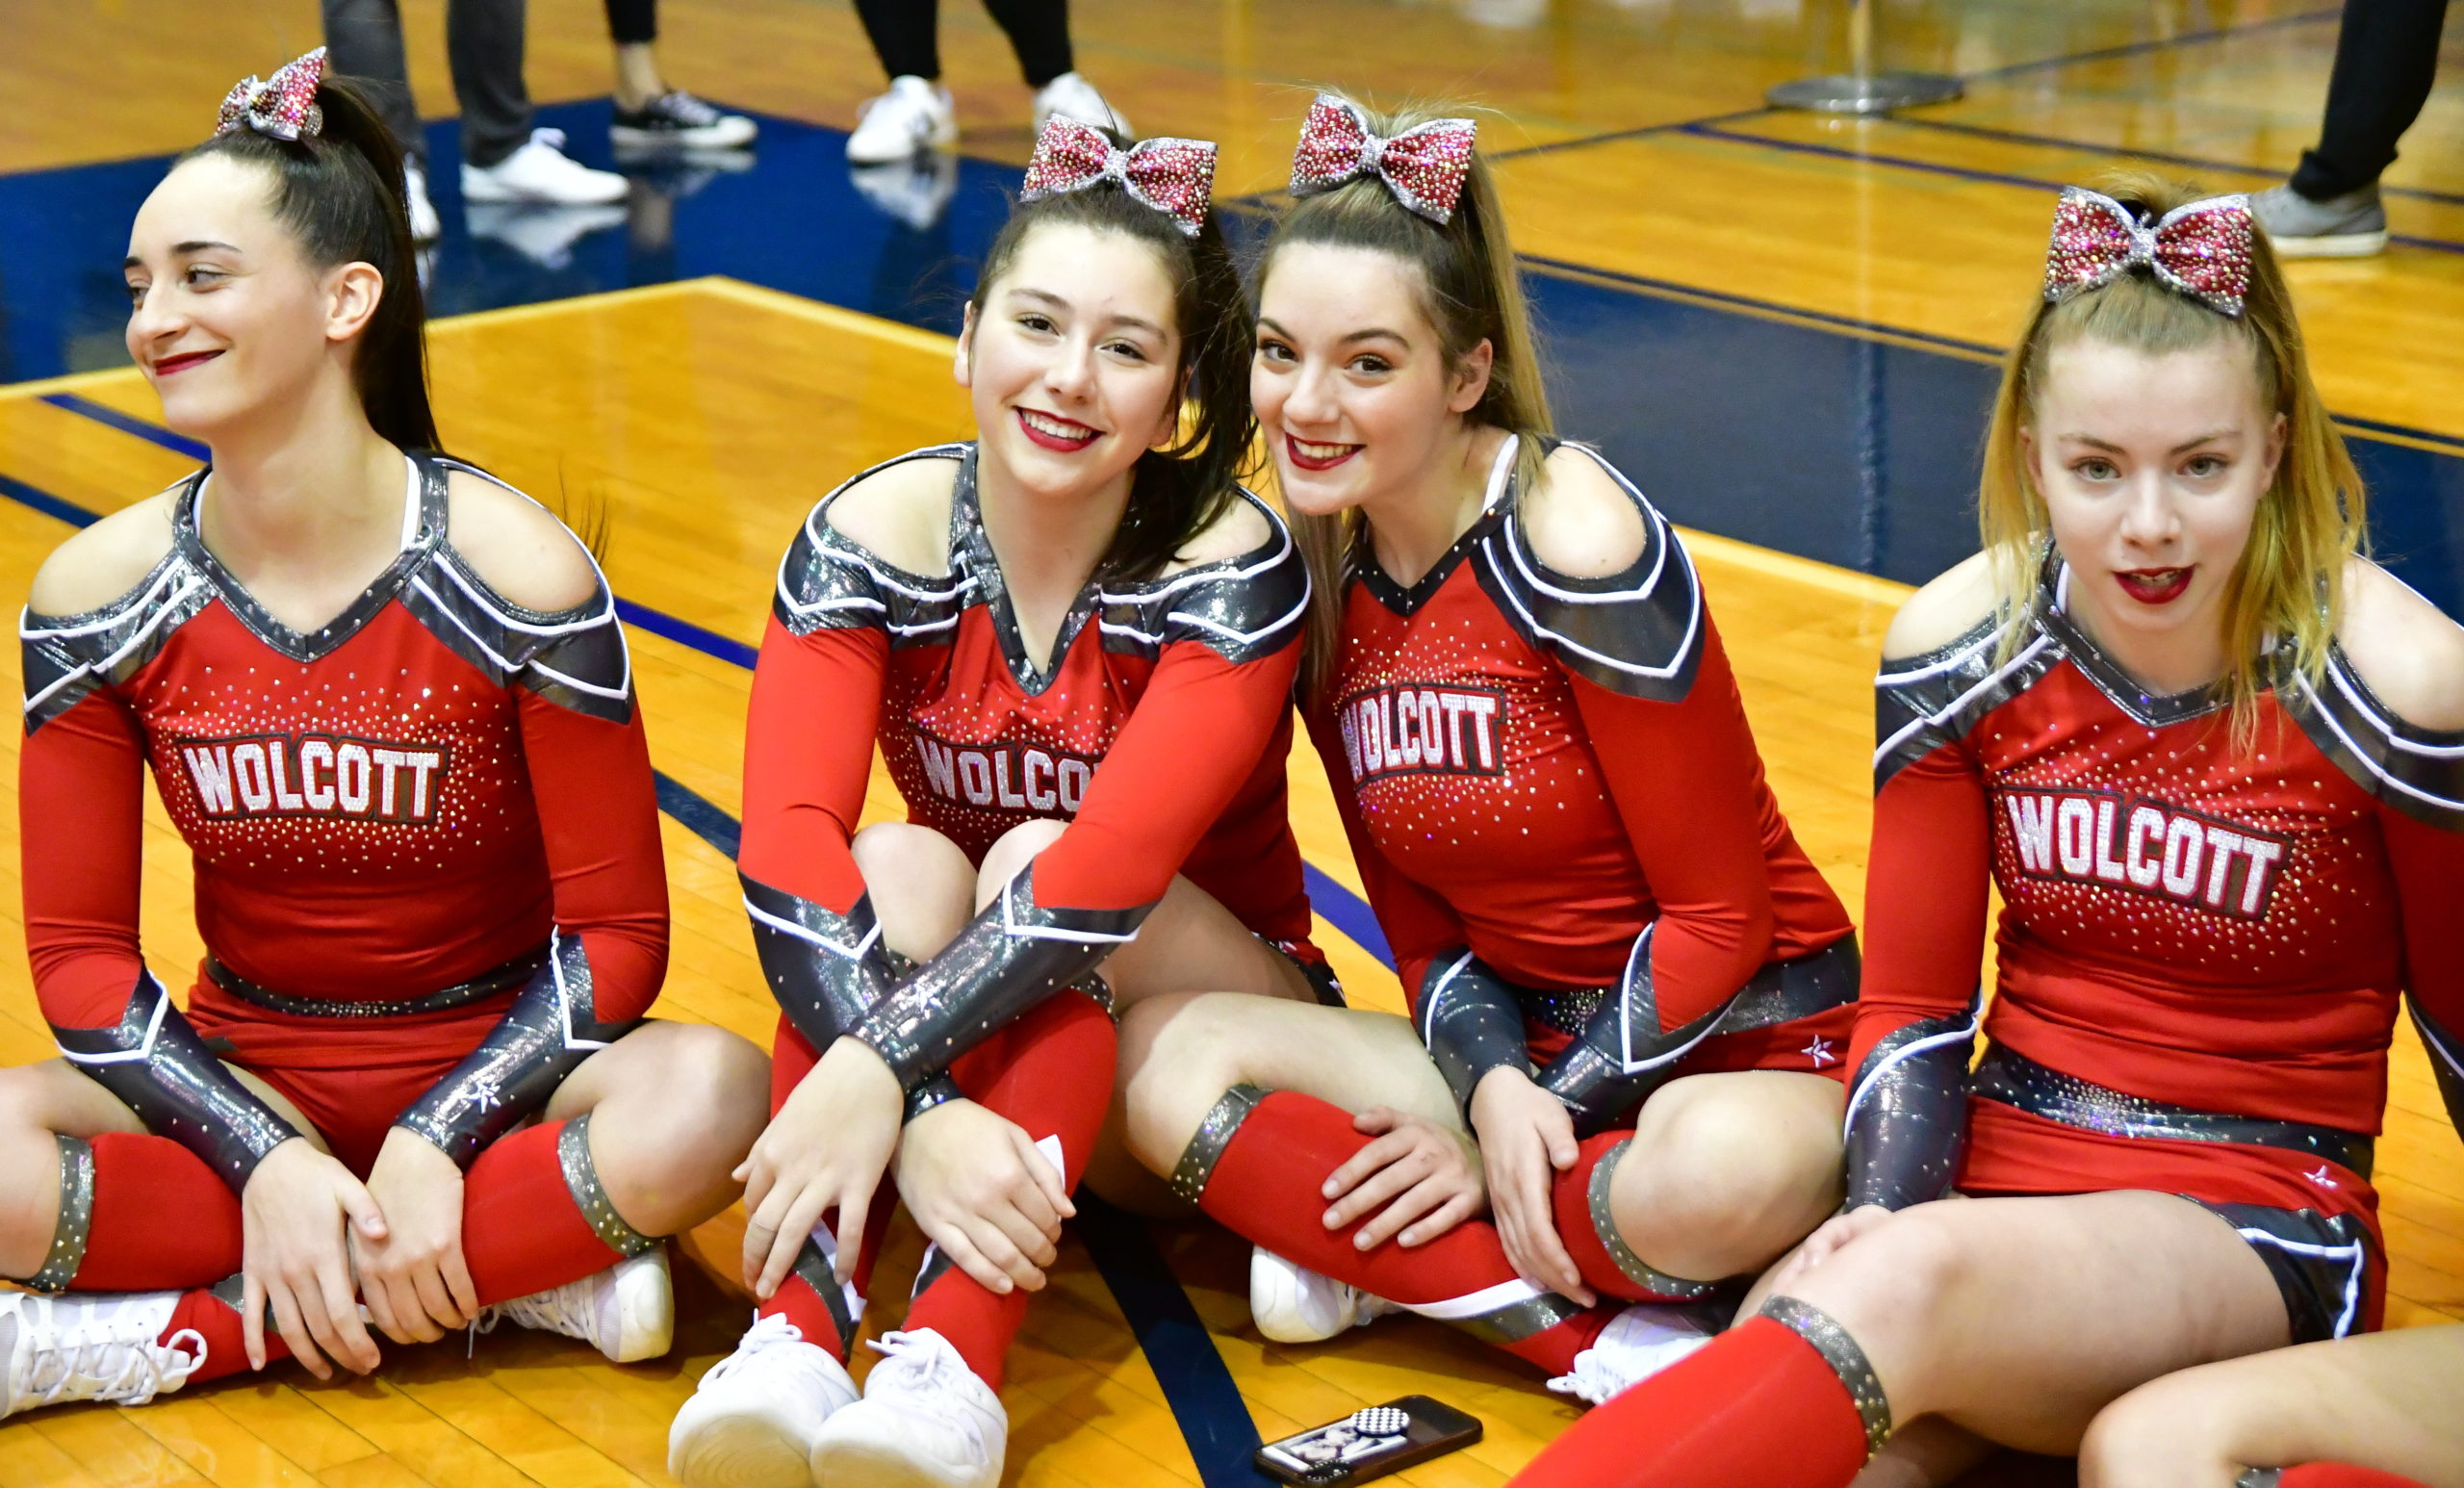 Gallery CIAC CHEER Devils Dare Cheer Competition; Wolcott High School